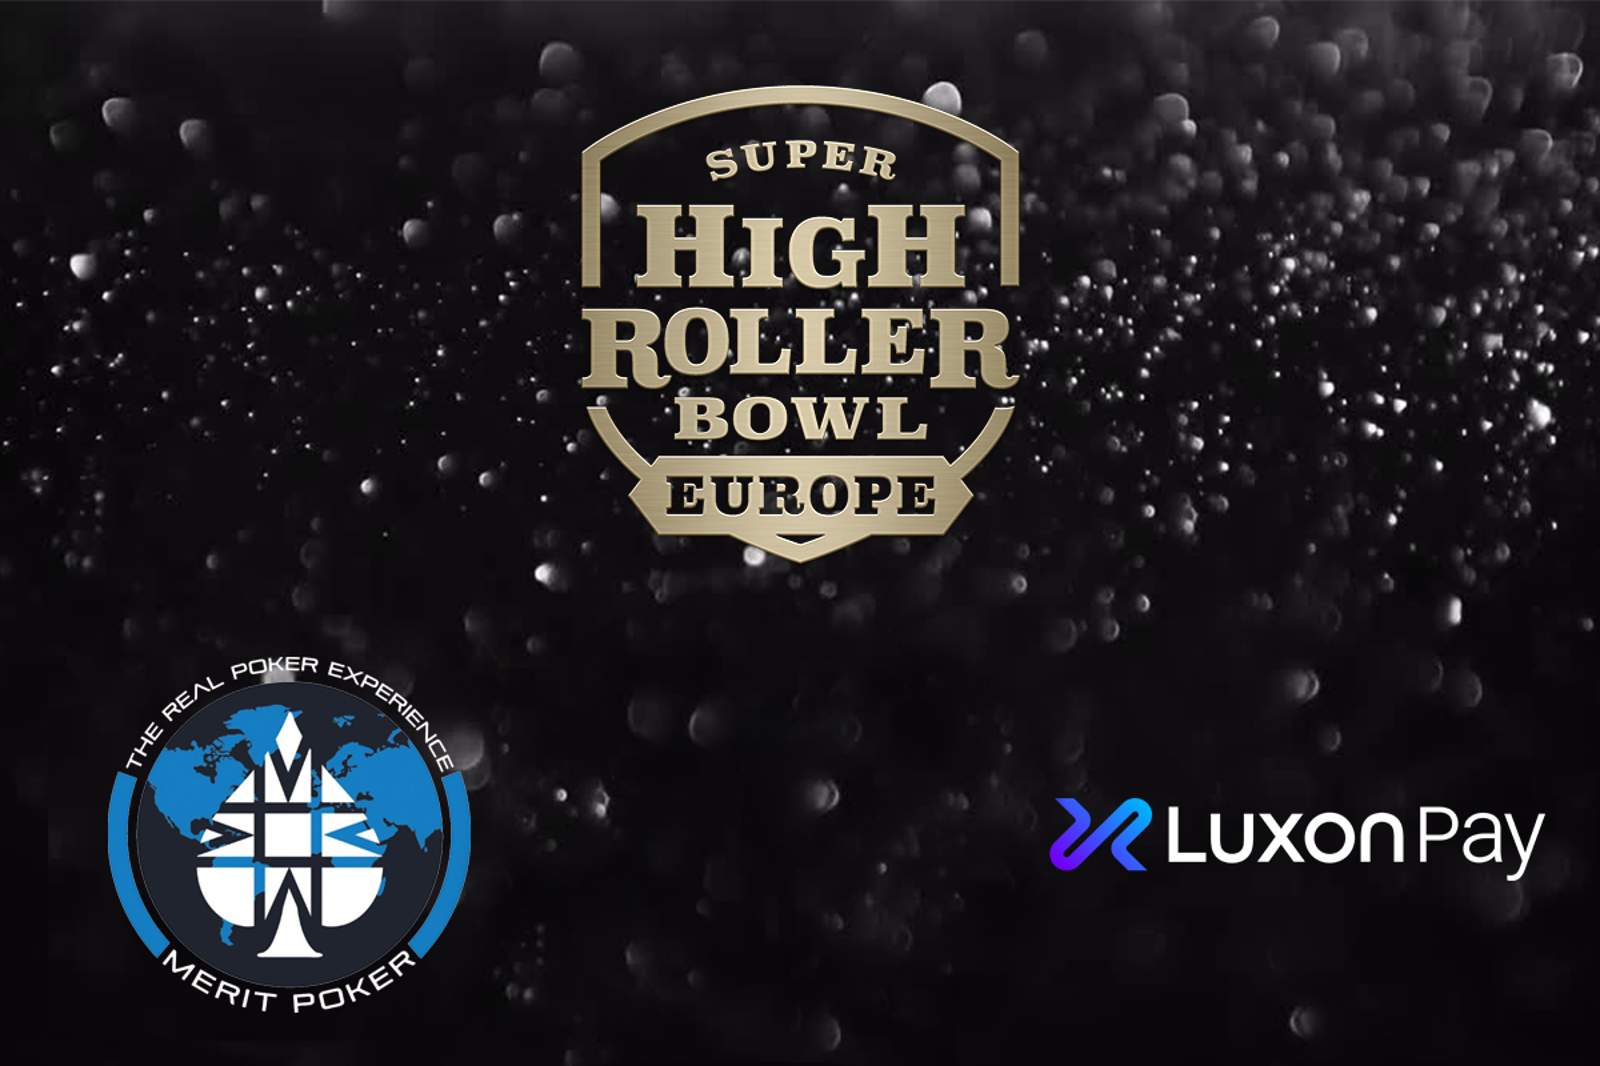 Merit Poker Presents Super High Roller Bowl Europe Sponsored by Luxon Pay